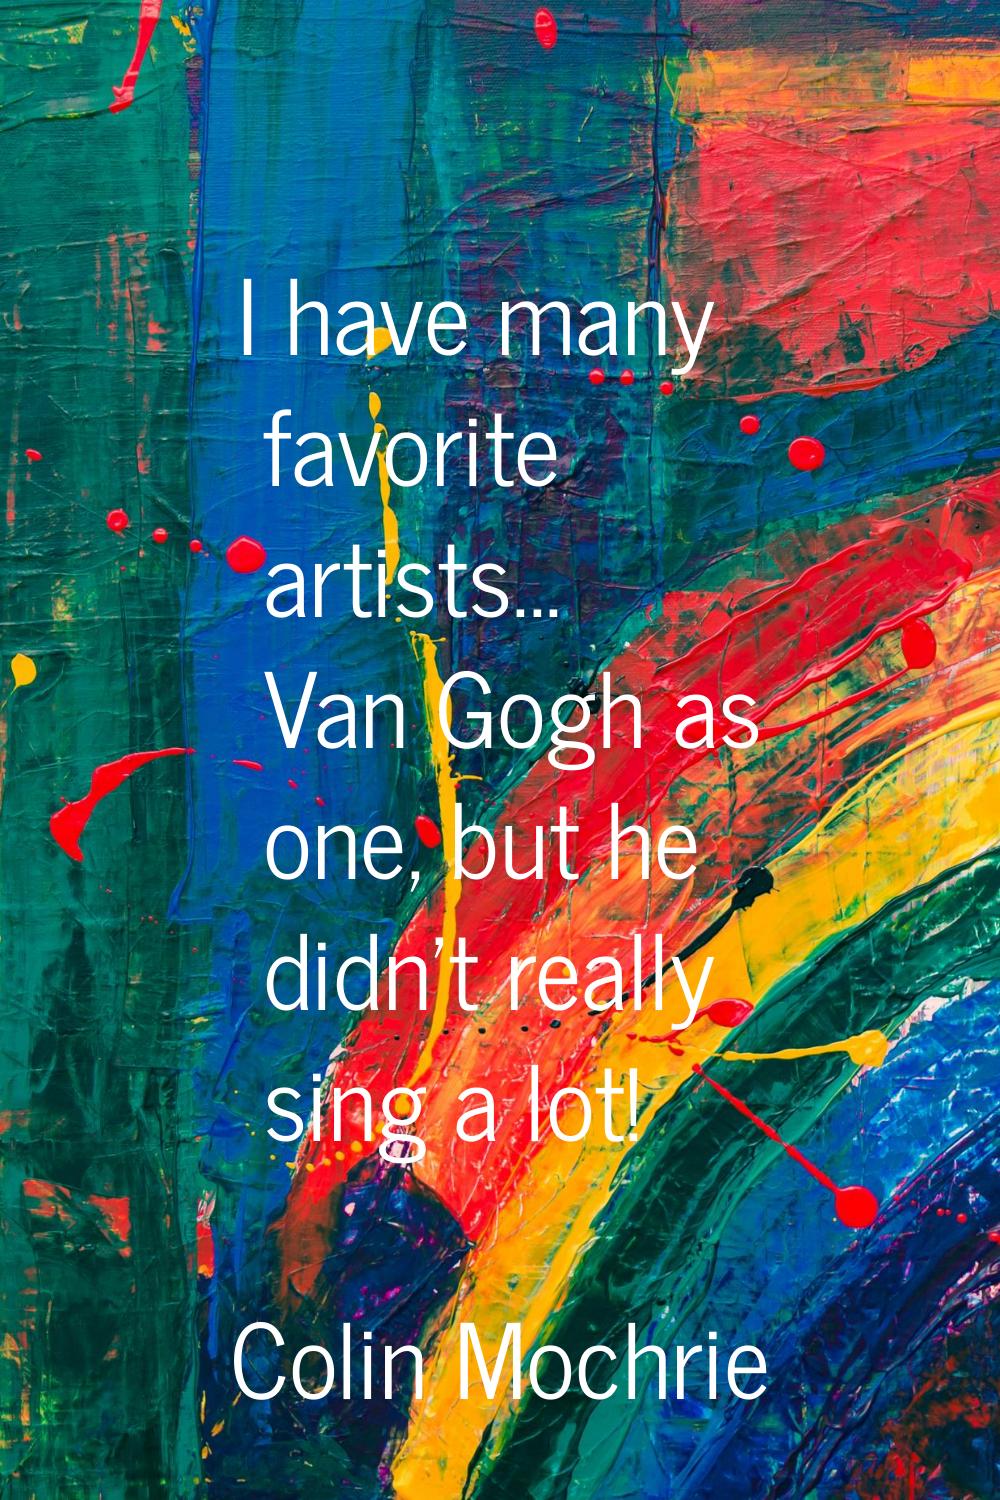 I have many favorite artists... Van Gogh as one, but he didn't really sing a lot!